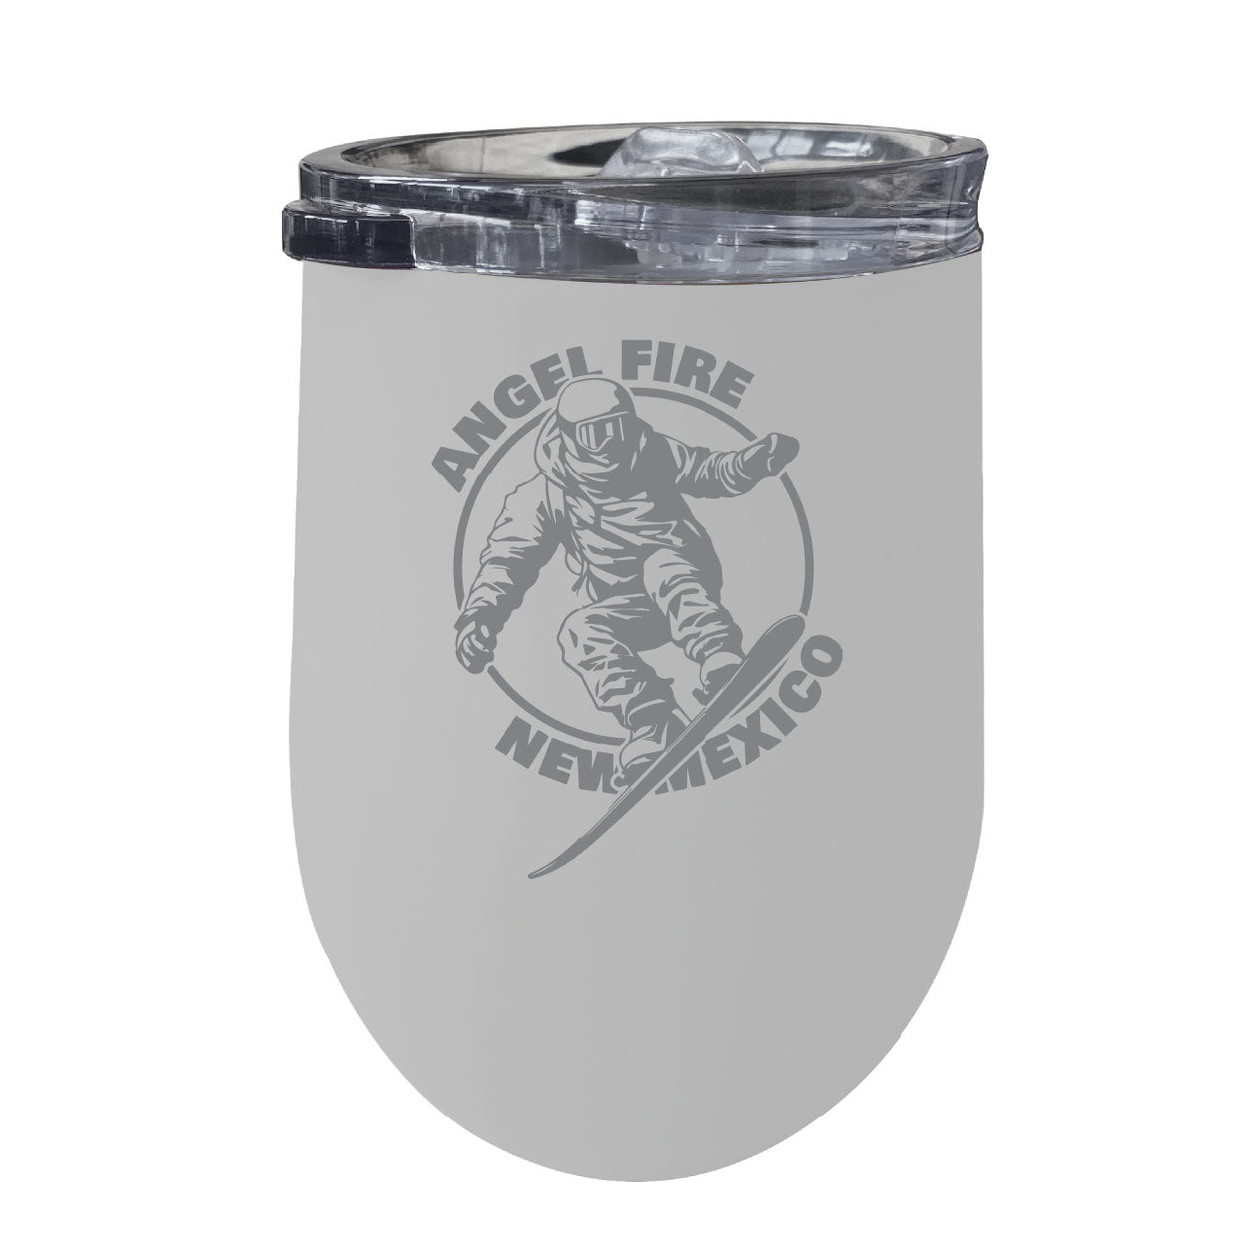 Angel Fire New Mexico Souvenir 12 Oz Engraved Insulated Wine Stainless Steel Tumbler - Rainbow Glitter Gray,,Single Unit